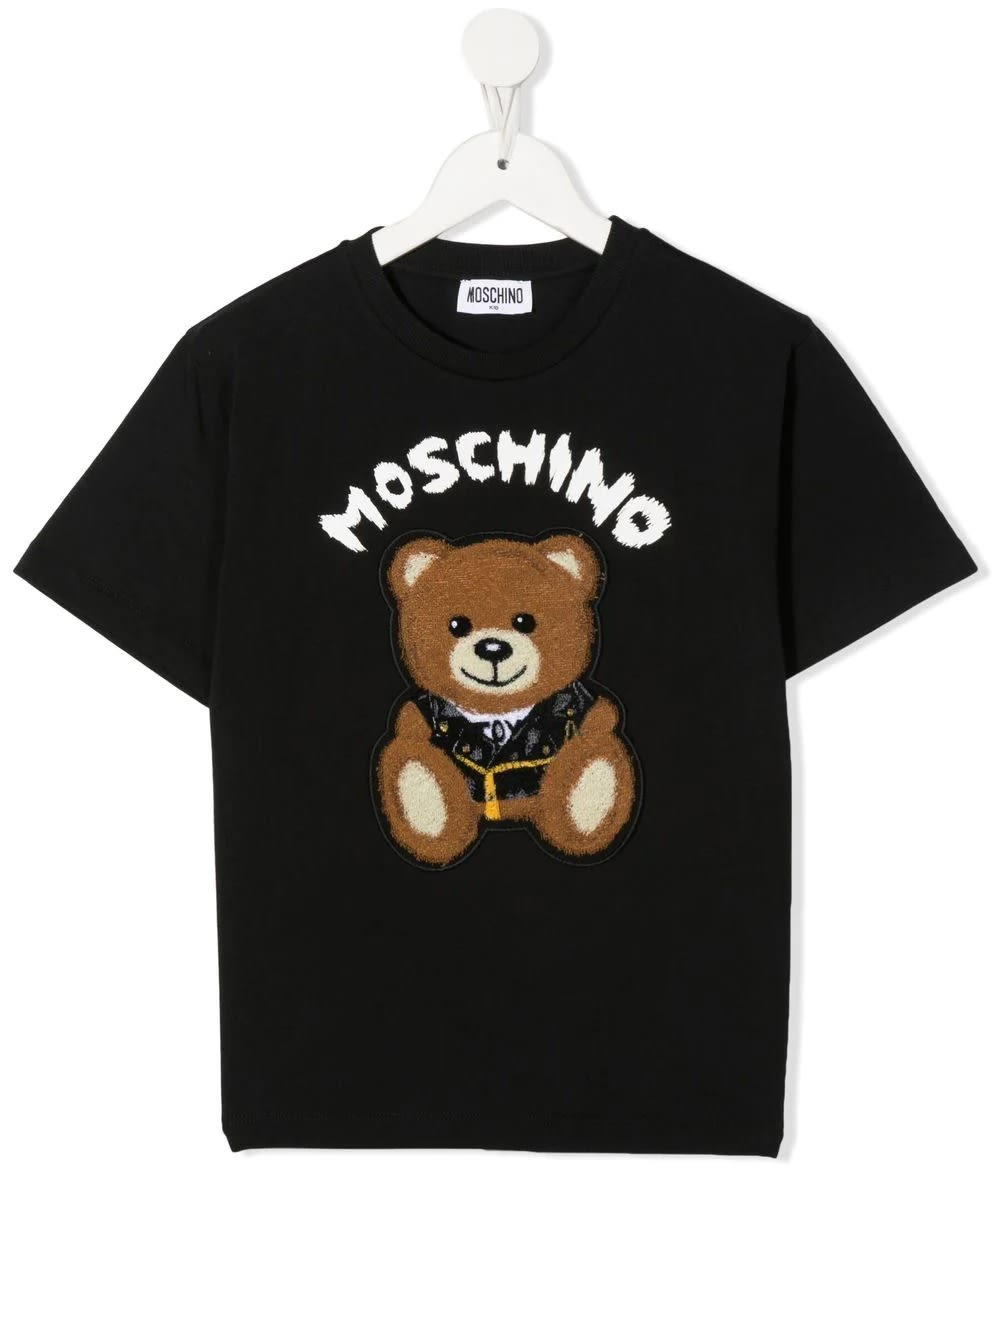 MOSCHINO KIDS BLACK T-SHIRT WITH TEDDY BEAR EMBROIDERY